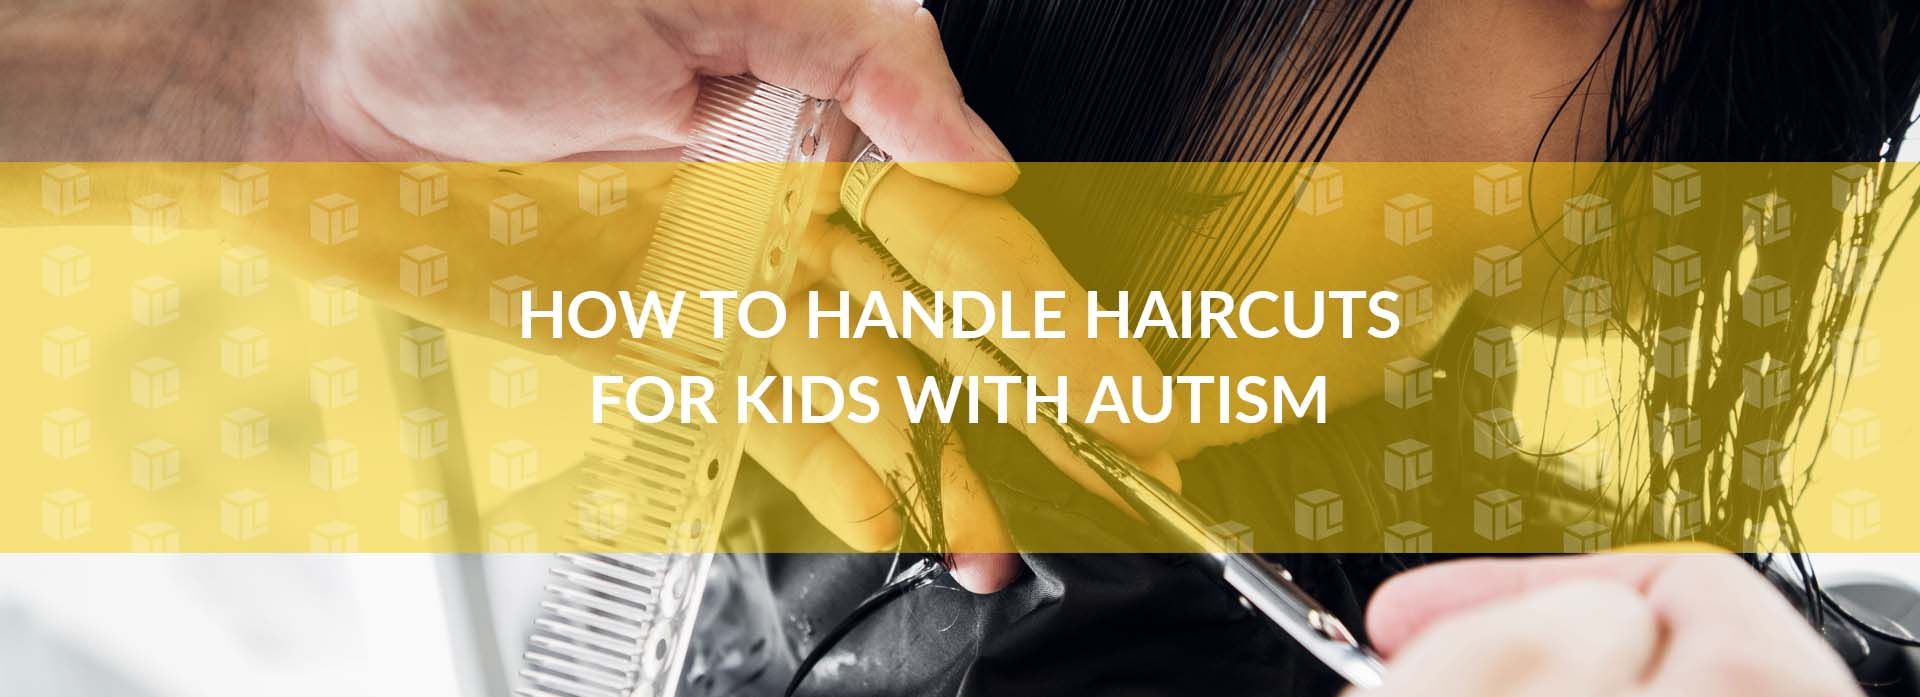 How To Handle Haircuts For Kids With Autism What People Really Mean By Accessibility Needs